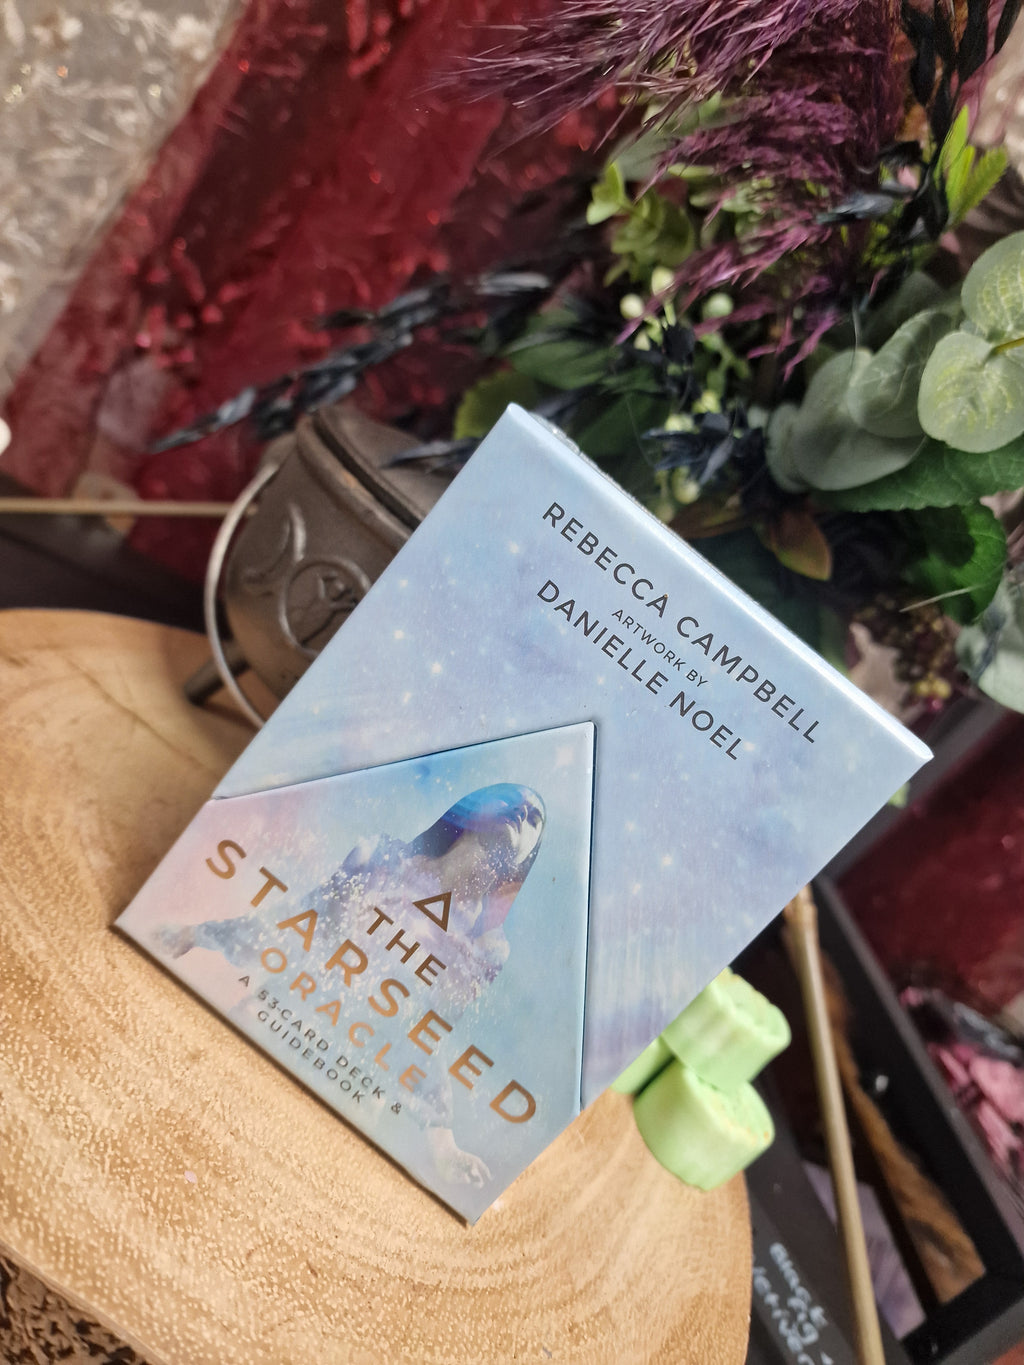 The starseed oracle cards